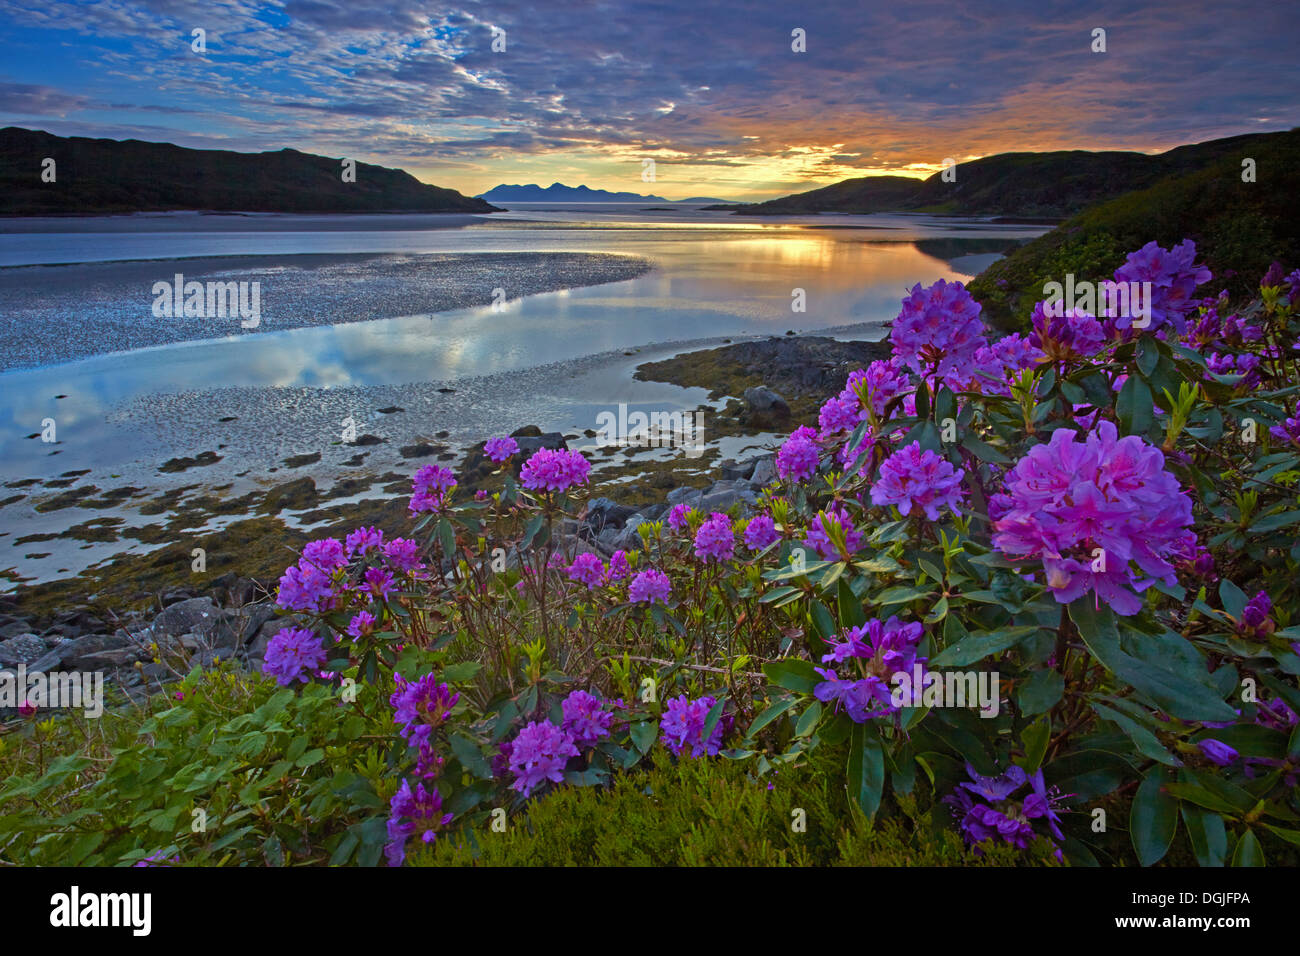 Sunset over Morar Sands looking towards with the islands of Eigg and Rhum. Stock Photo